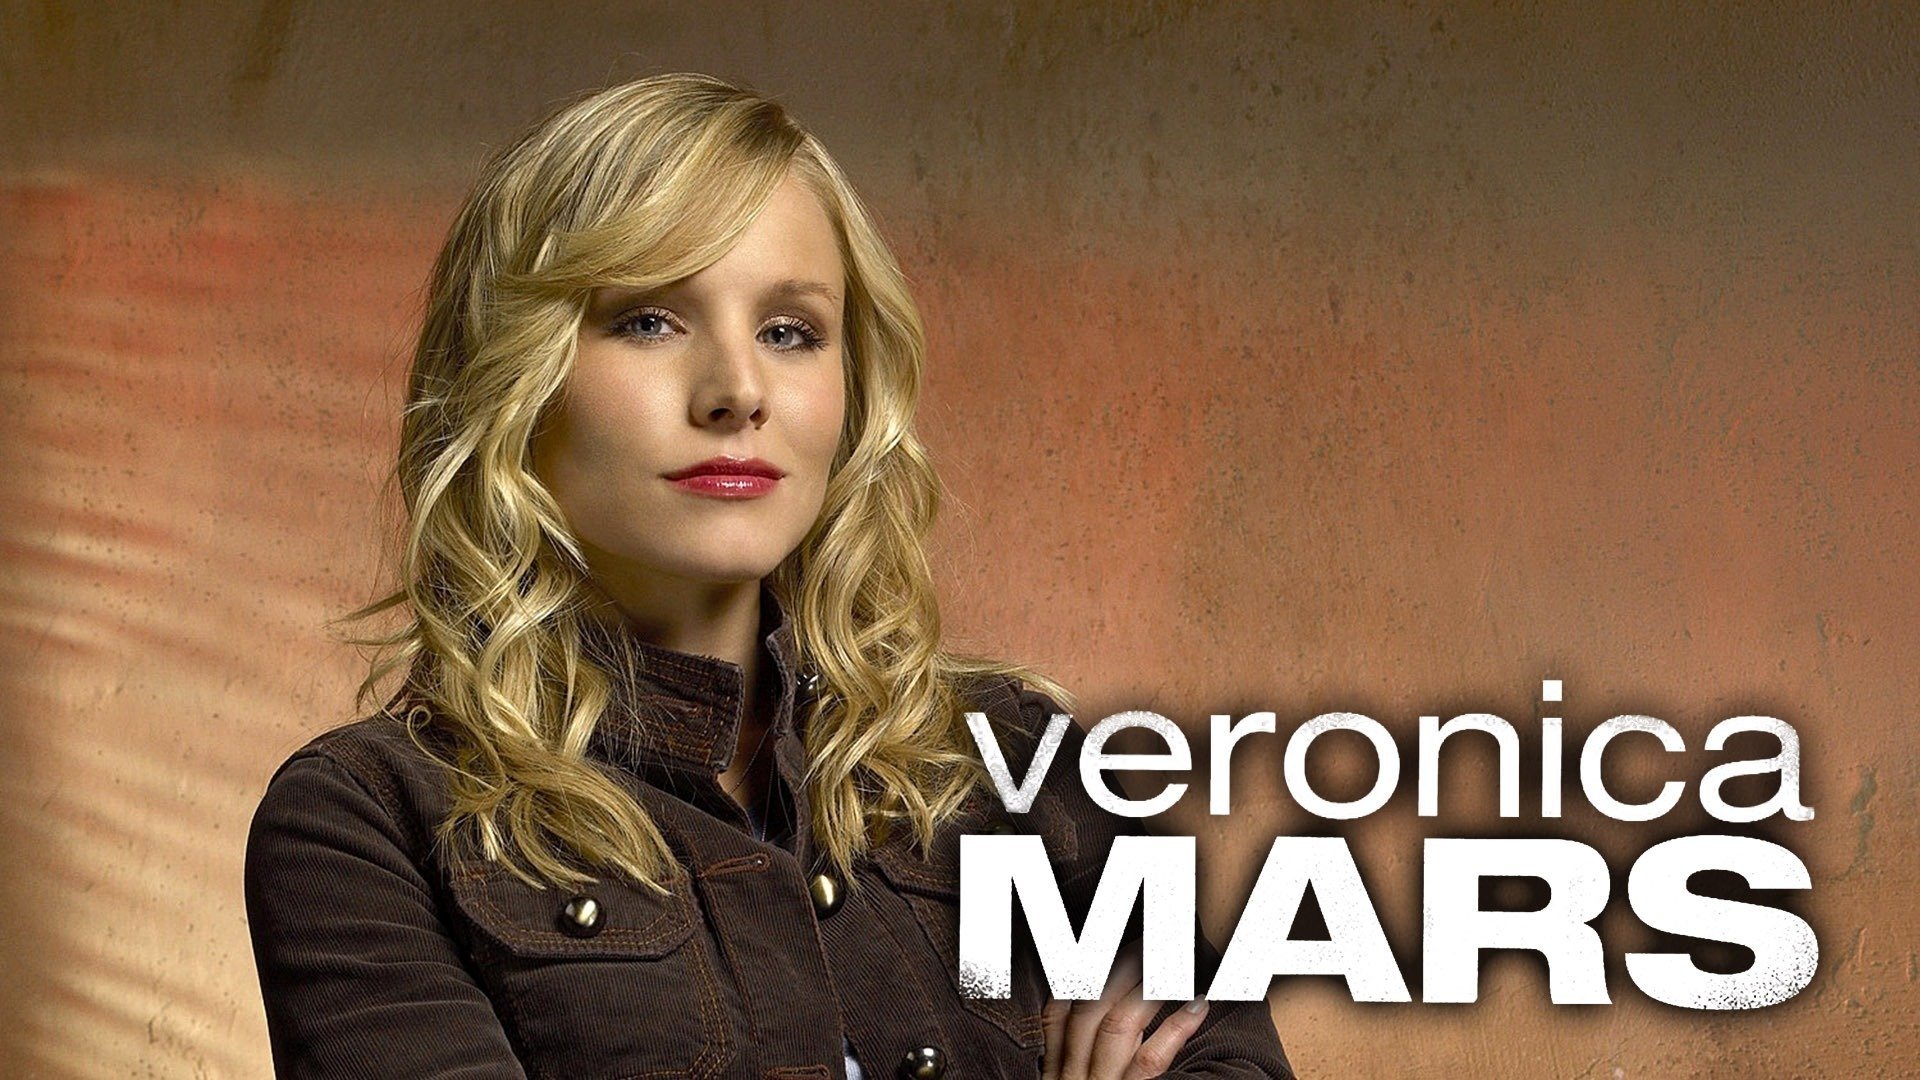 Lost in the Movies: Veronica Mars - 